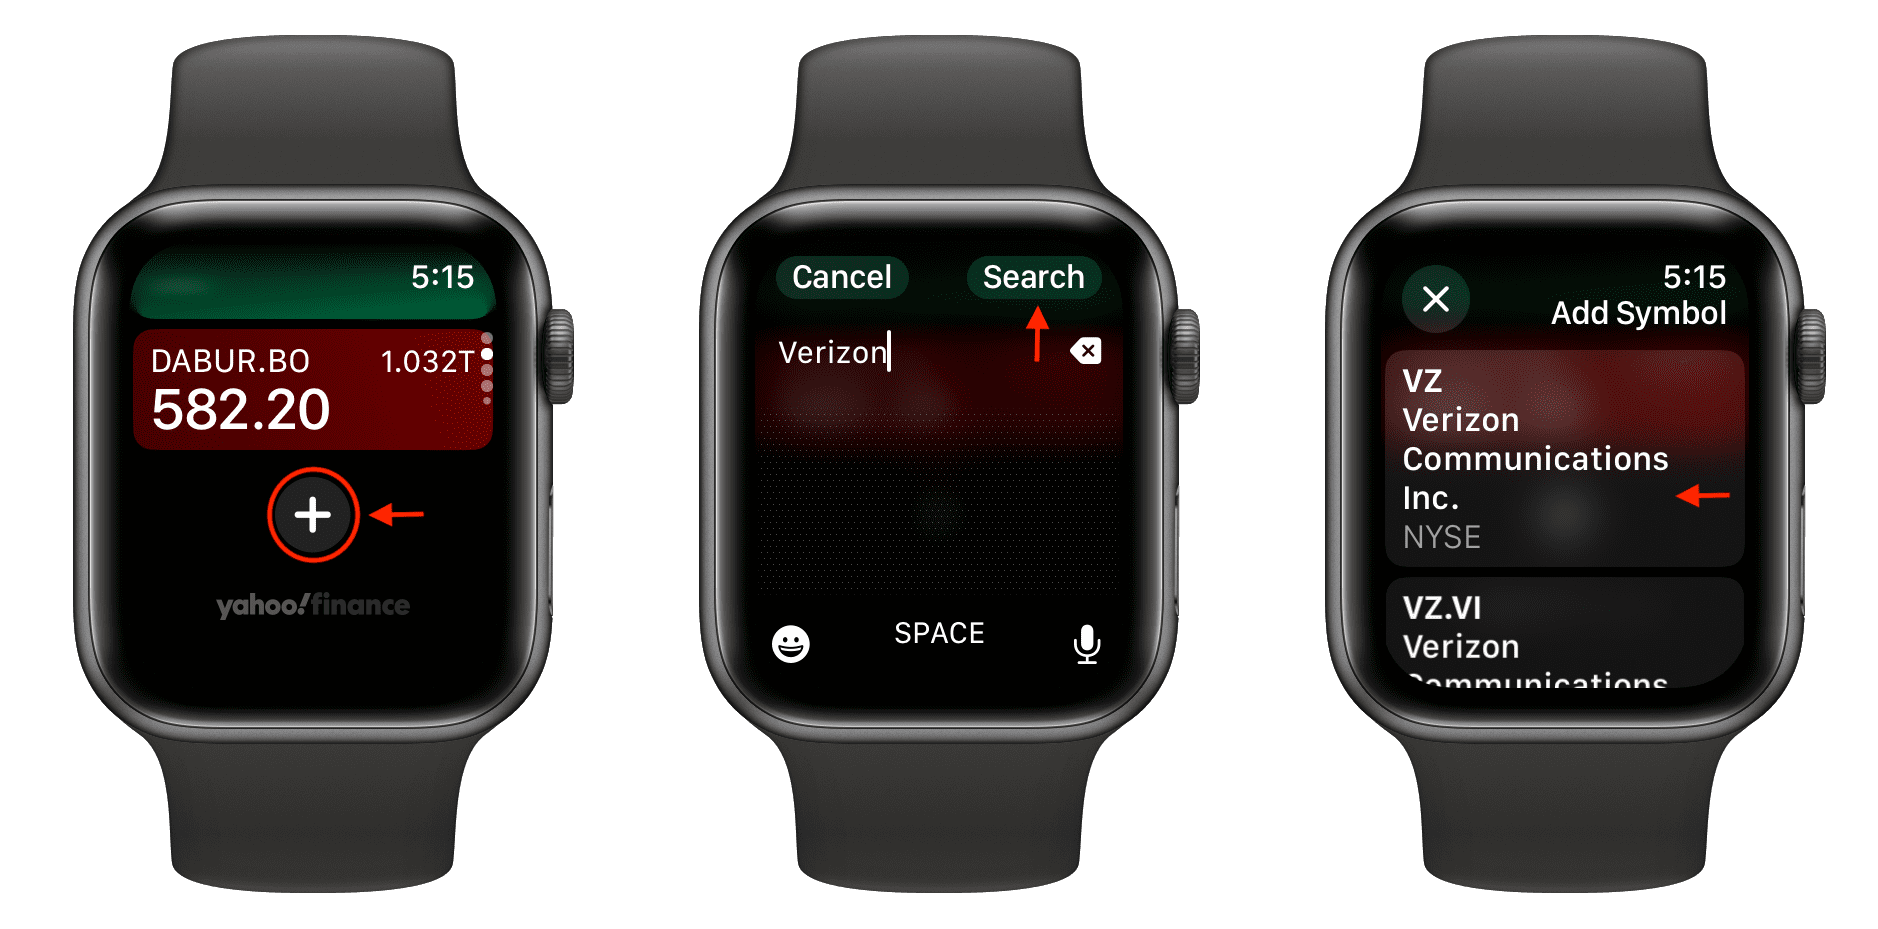 Add a stock to Stocks app on Apple Watch